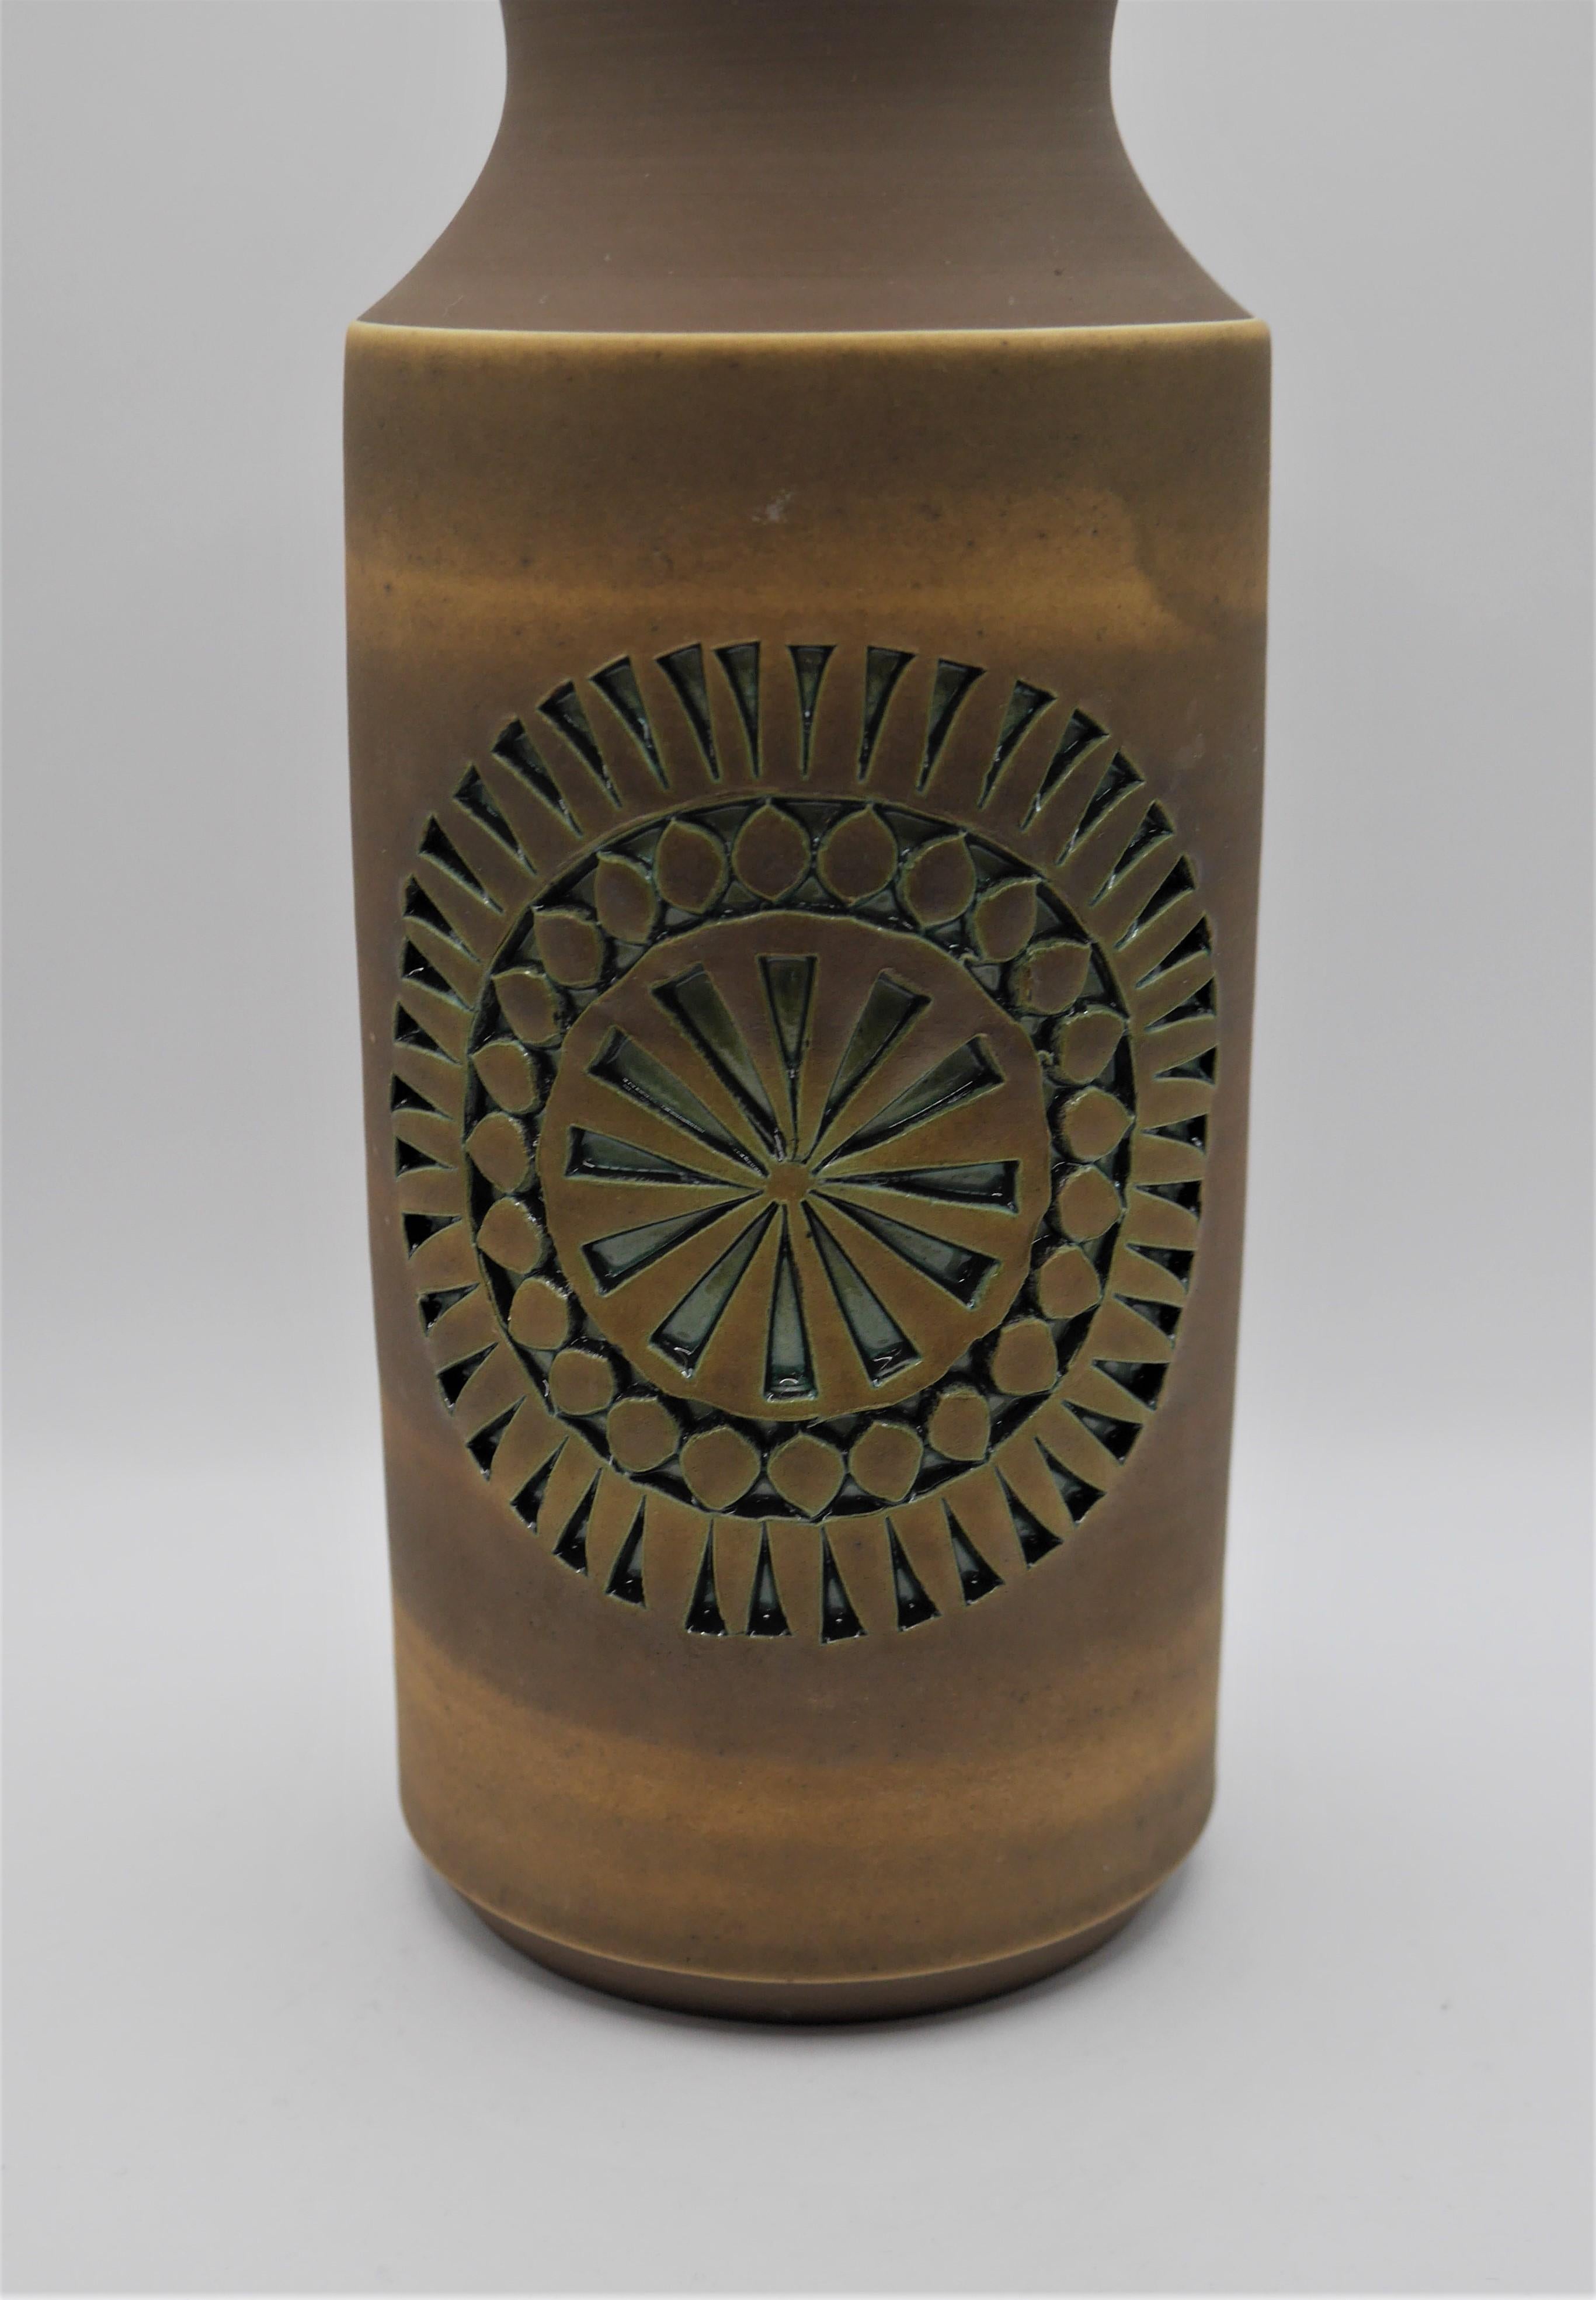 A beautiful, piece by Tomas Anagrius for Alingsås ceramics, Sweden. A warm, pale brown and green glaze with a large circular motif on one side. 

Alingsås Keramik was started in 1947 by Halvard Oldberg and Hilding Canemark. In the beginning,